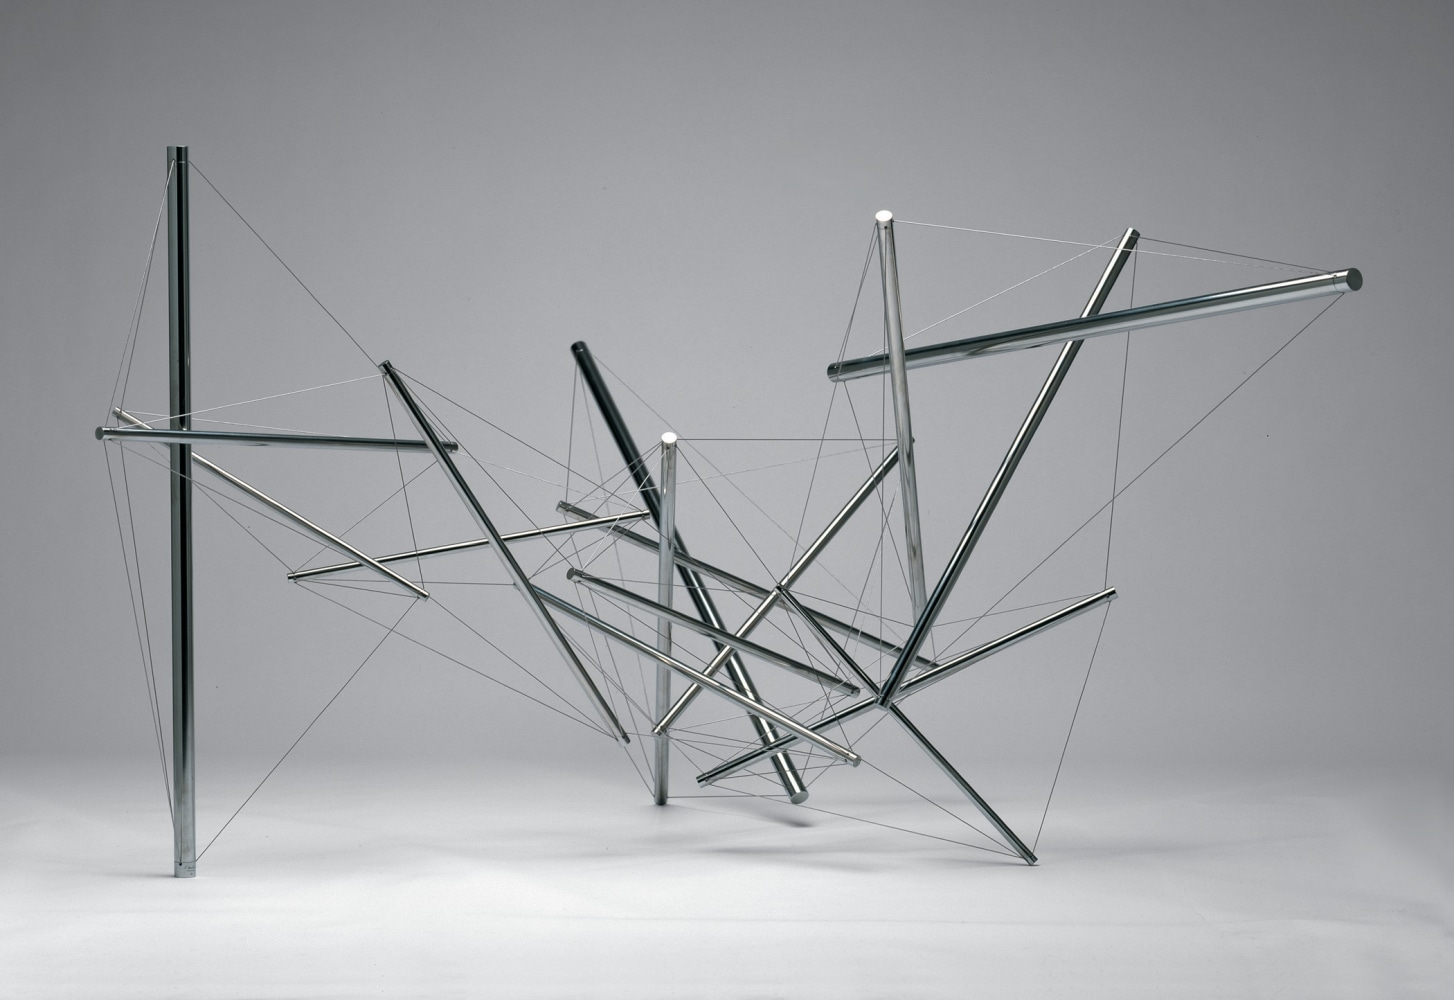 Forest Devil, 1977

stainless-steel, edition of 4

204 x 420 x 300 in. / 518.2 x 1,066.8 x 762 cm

&amp;nbsp;